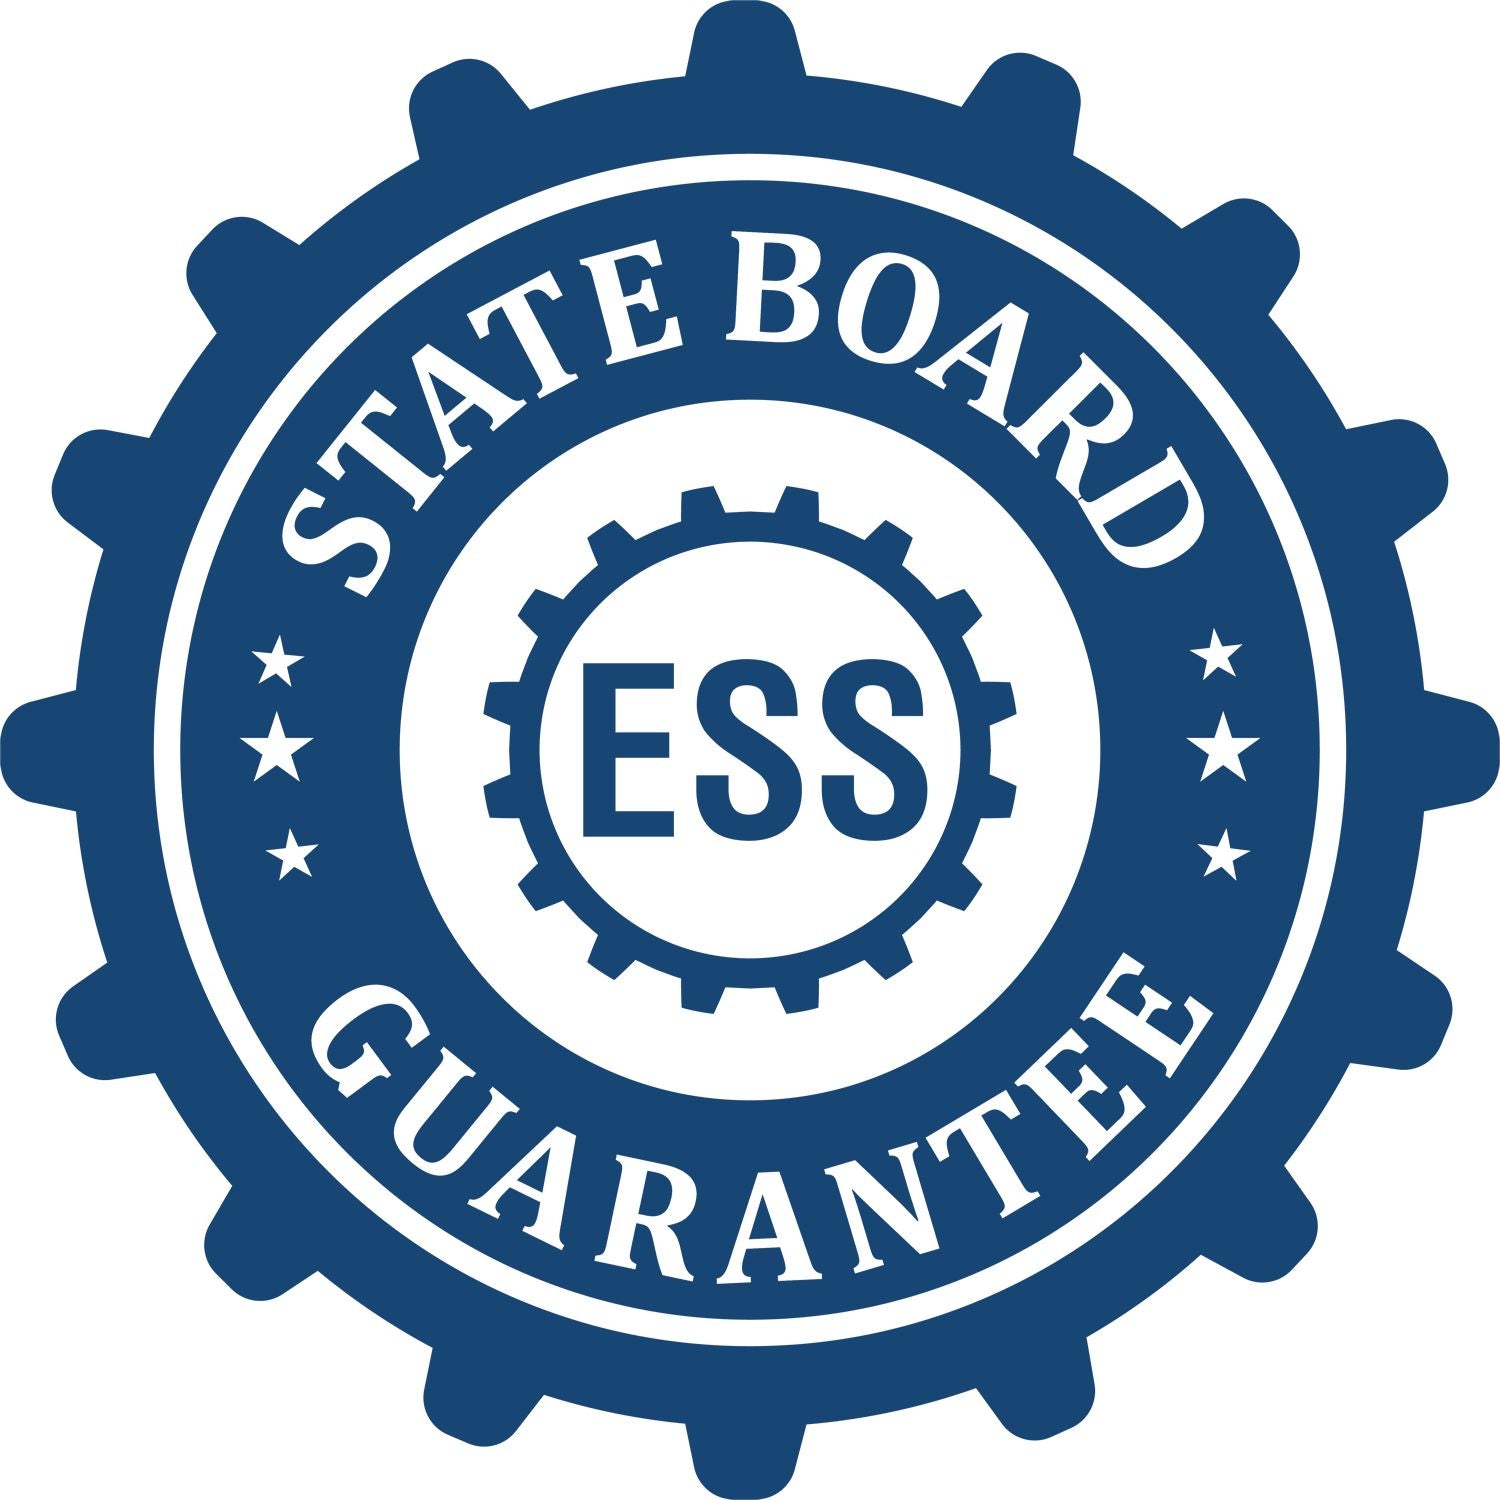 An emblem in a gear shape illustrating a state board guarantee for the Premium MaxLight Pre-Inked Wisconsin Engineering Stamp product.